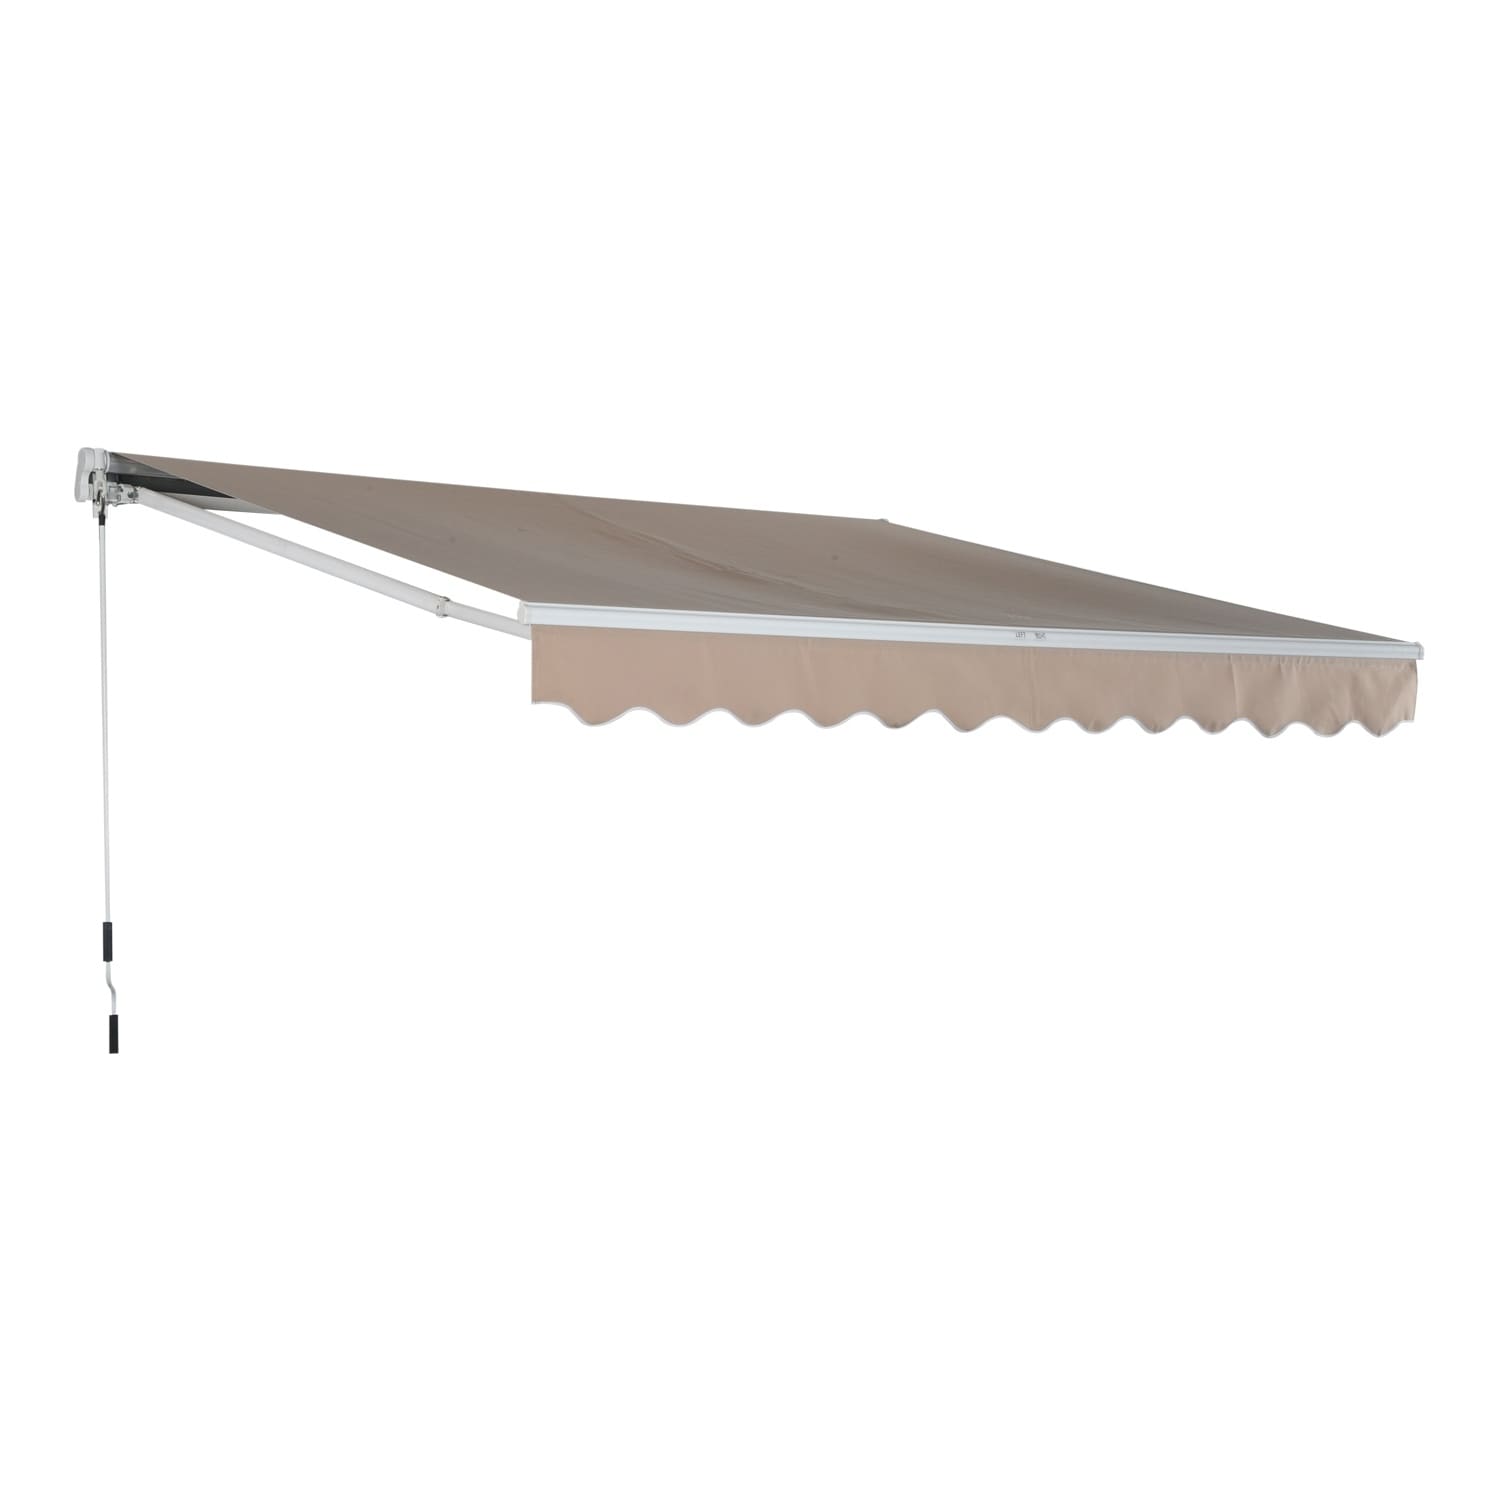 Shop Outsunny 116 Manual Retractable Patio Sun Shade Awning Free